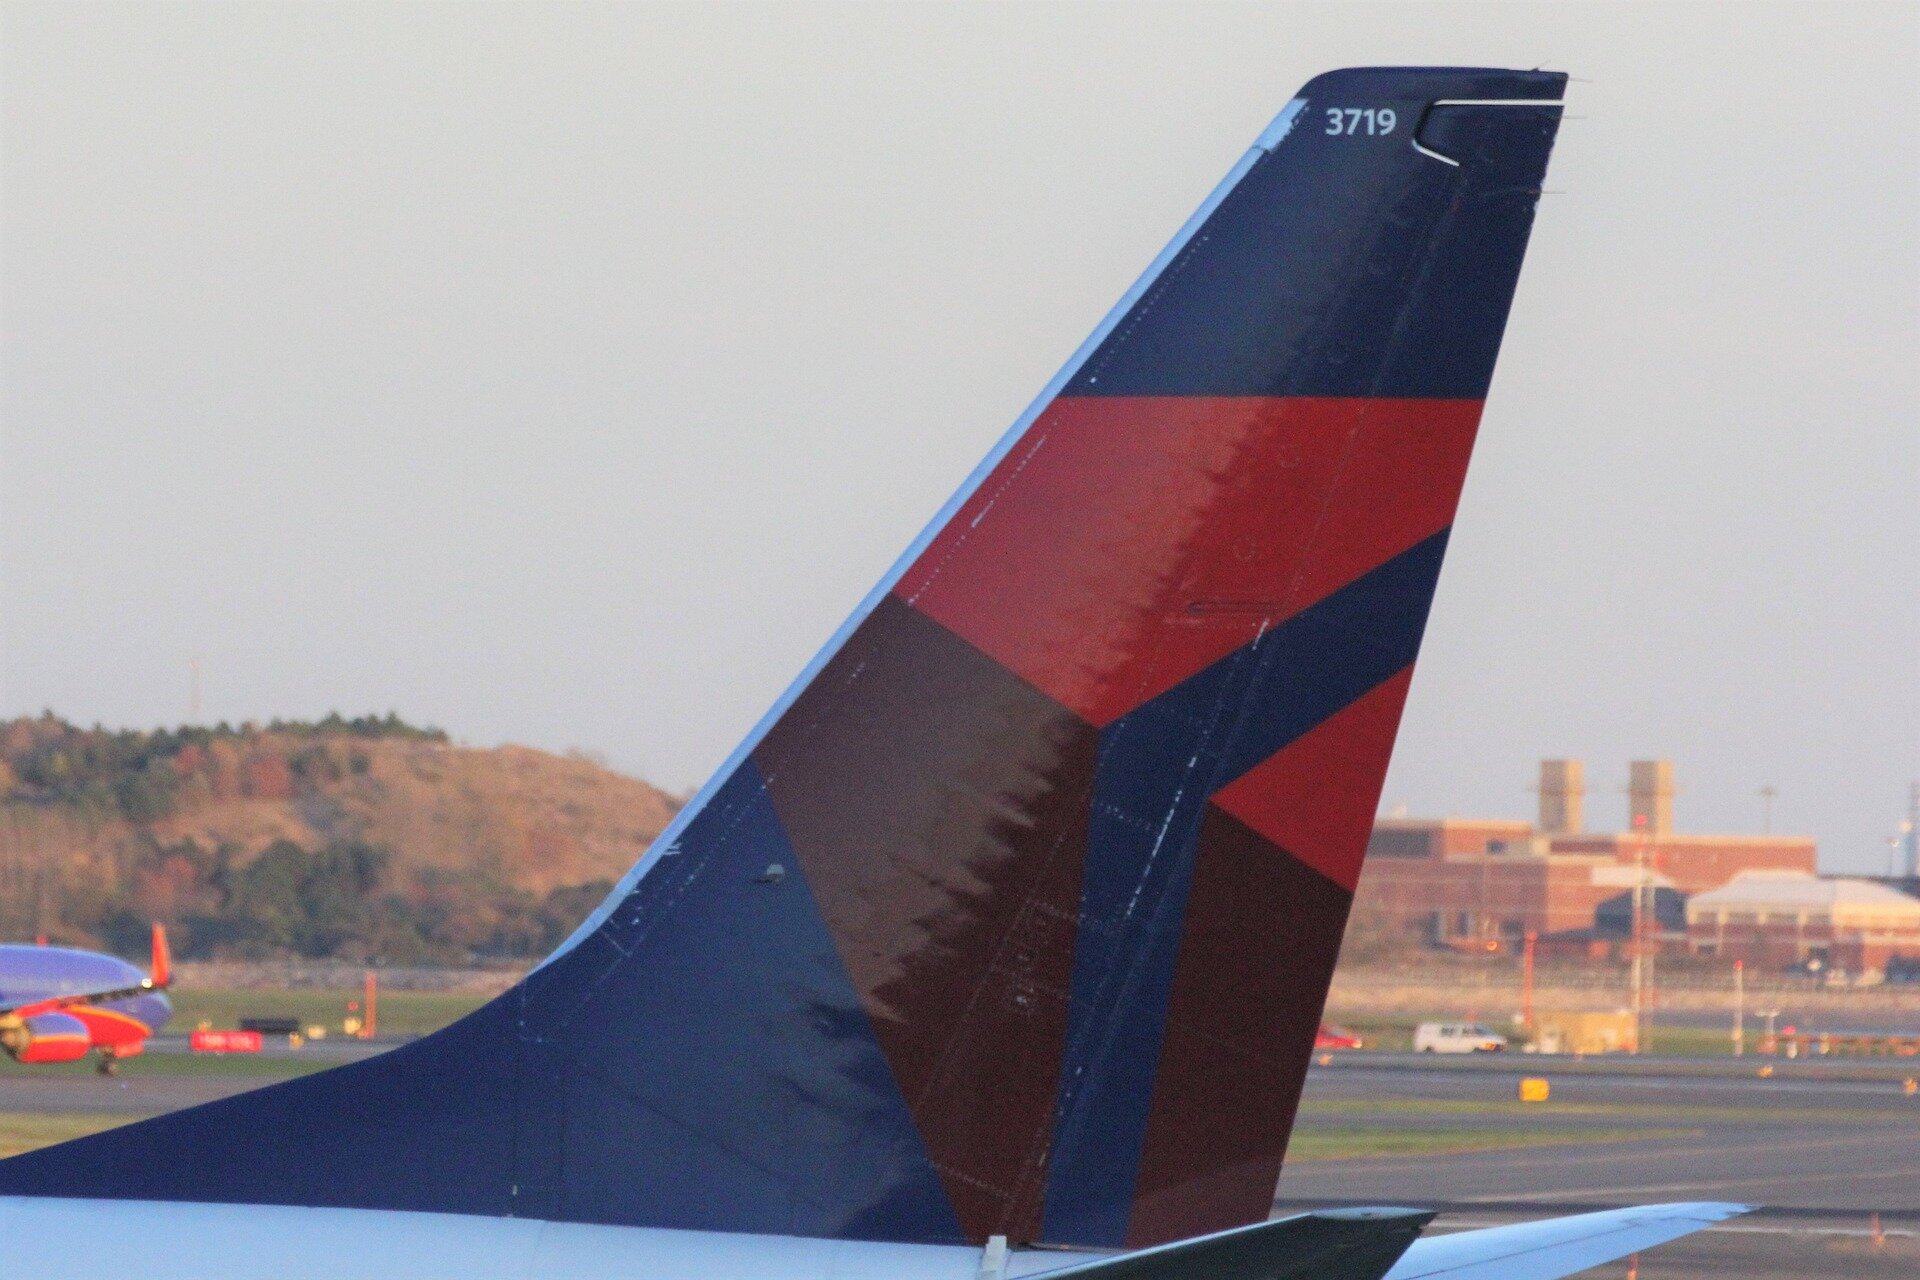 Delta’s free WiFi, Sync platform point to more connected future